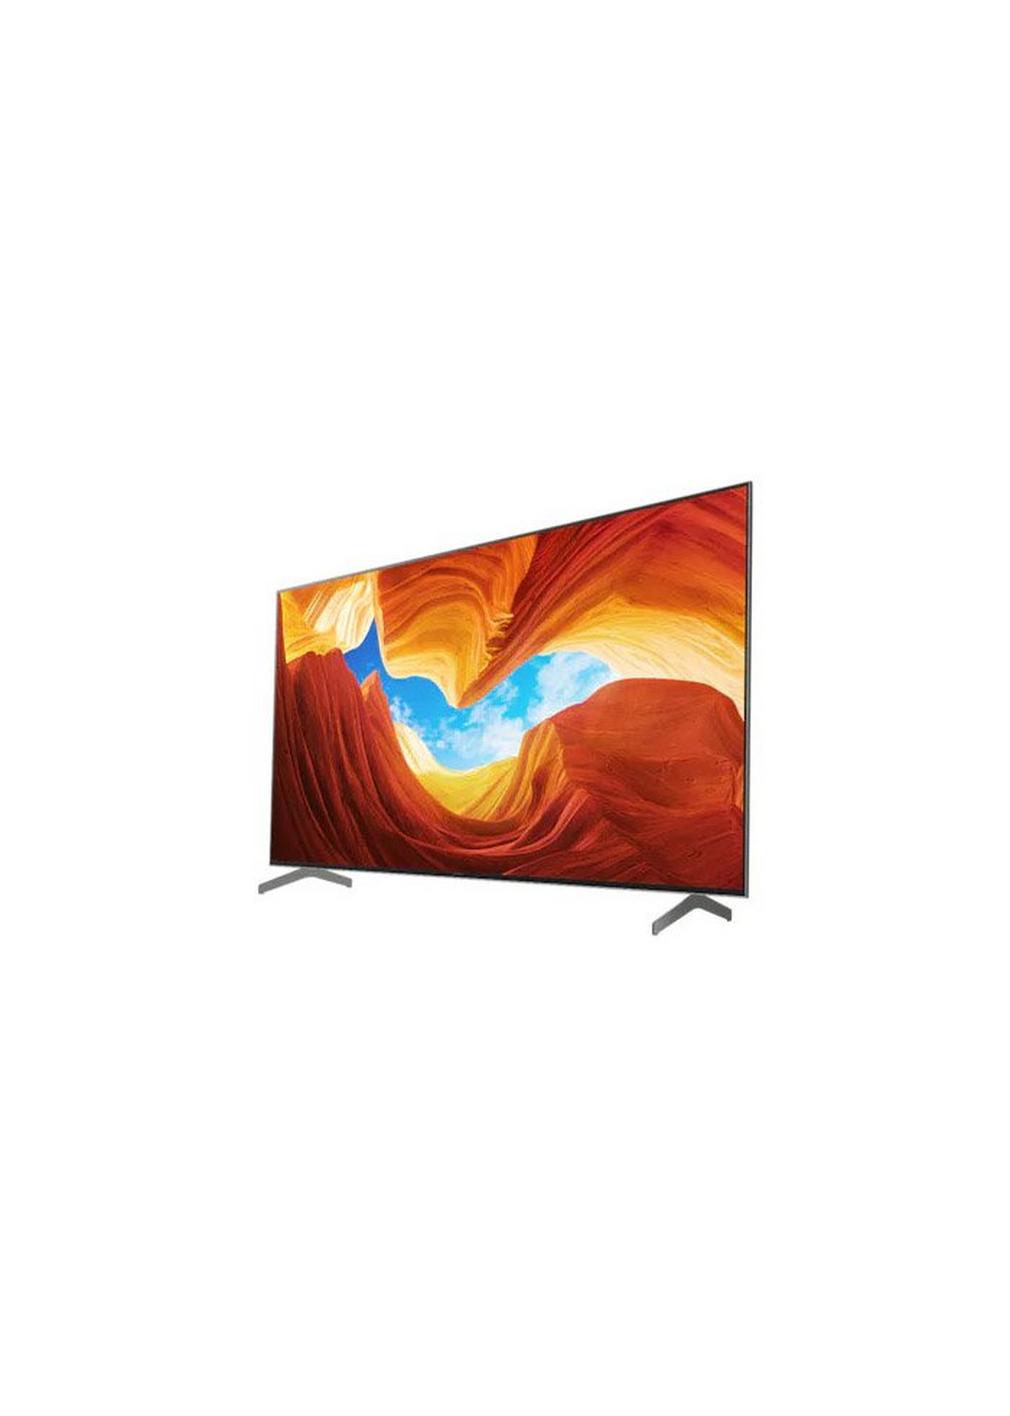 Sony 55-inch 4K HDR LED Android TV (55X9000H)3